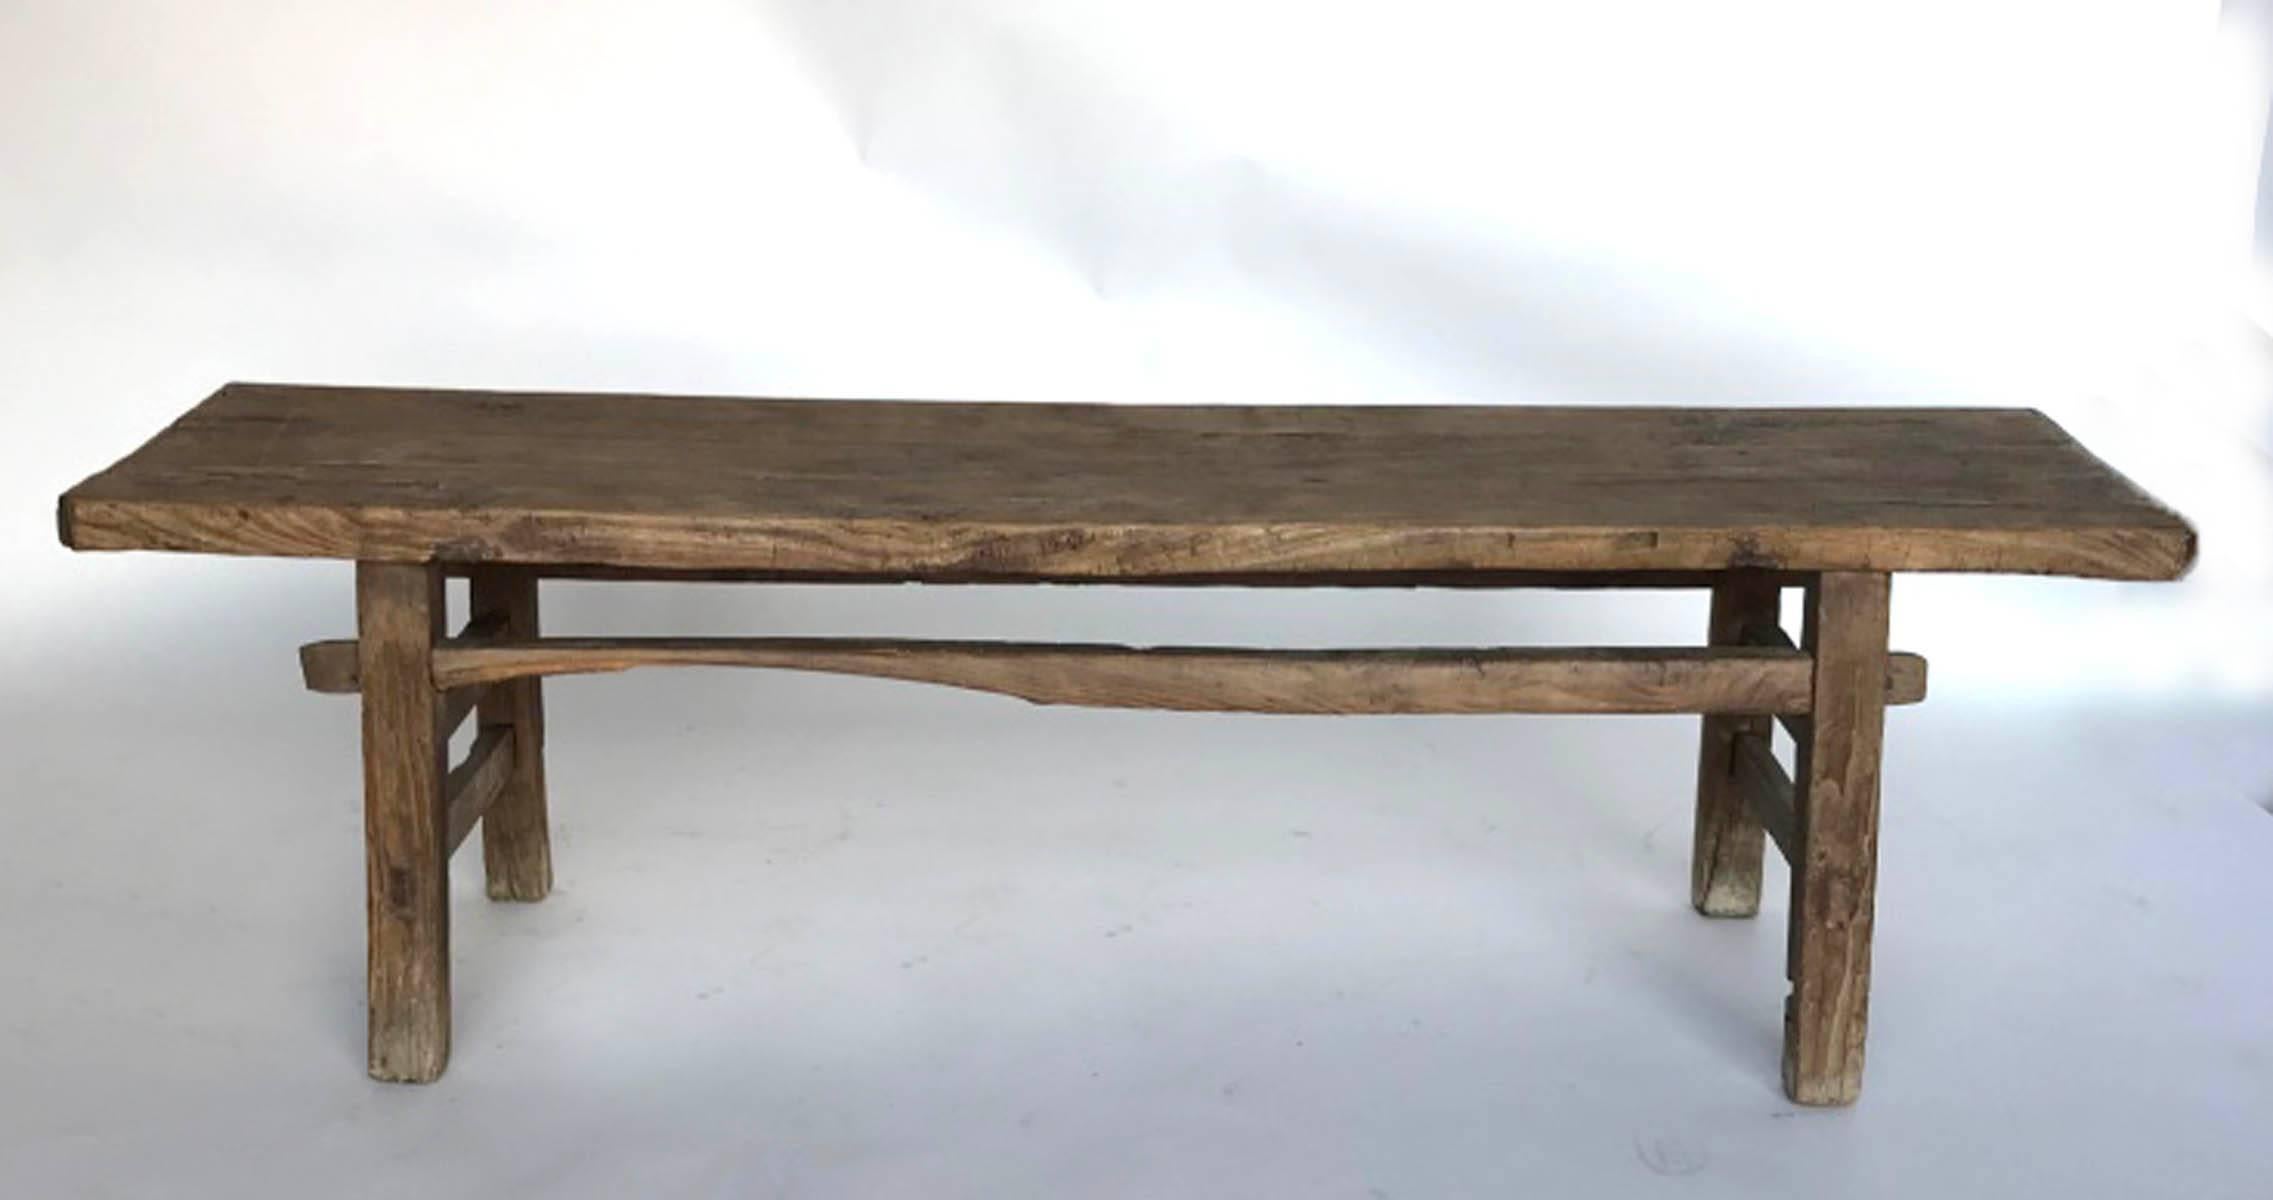 Rustic 19th century elm bench, beautiful wood grain with smooth to the touch patina. Mortise and tenon construction. Double side stretchers.
 